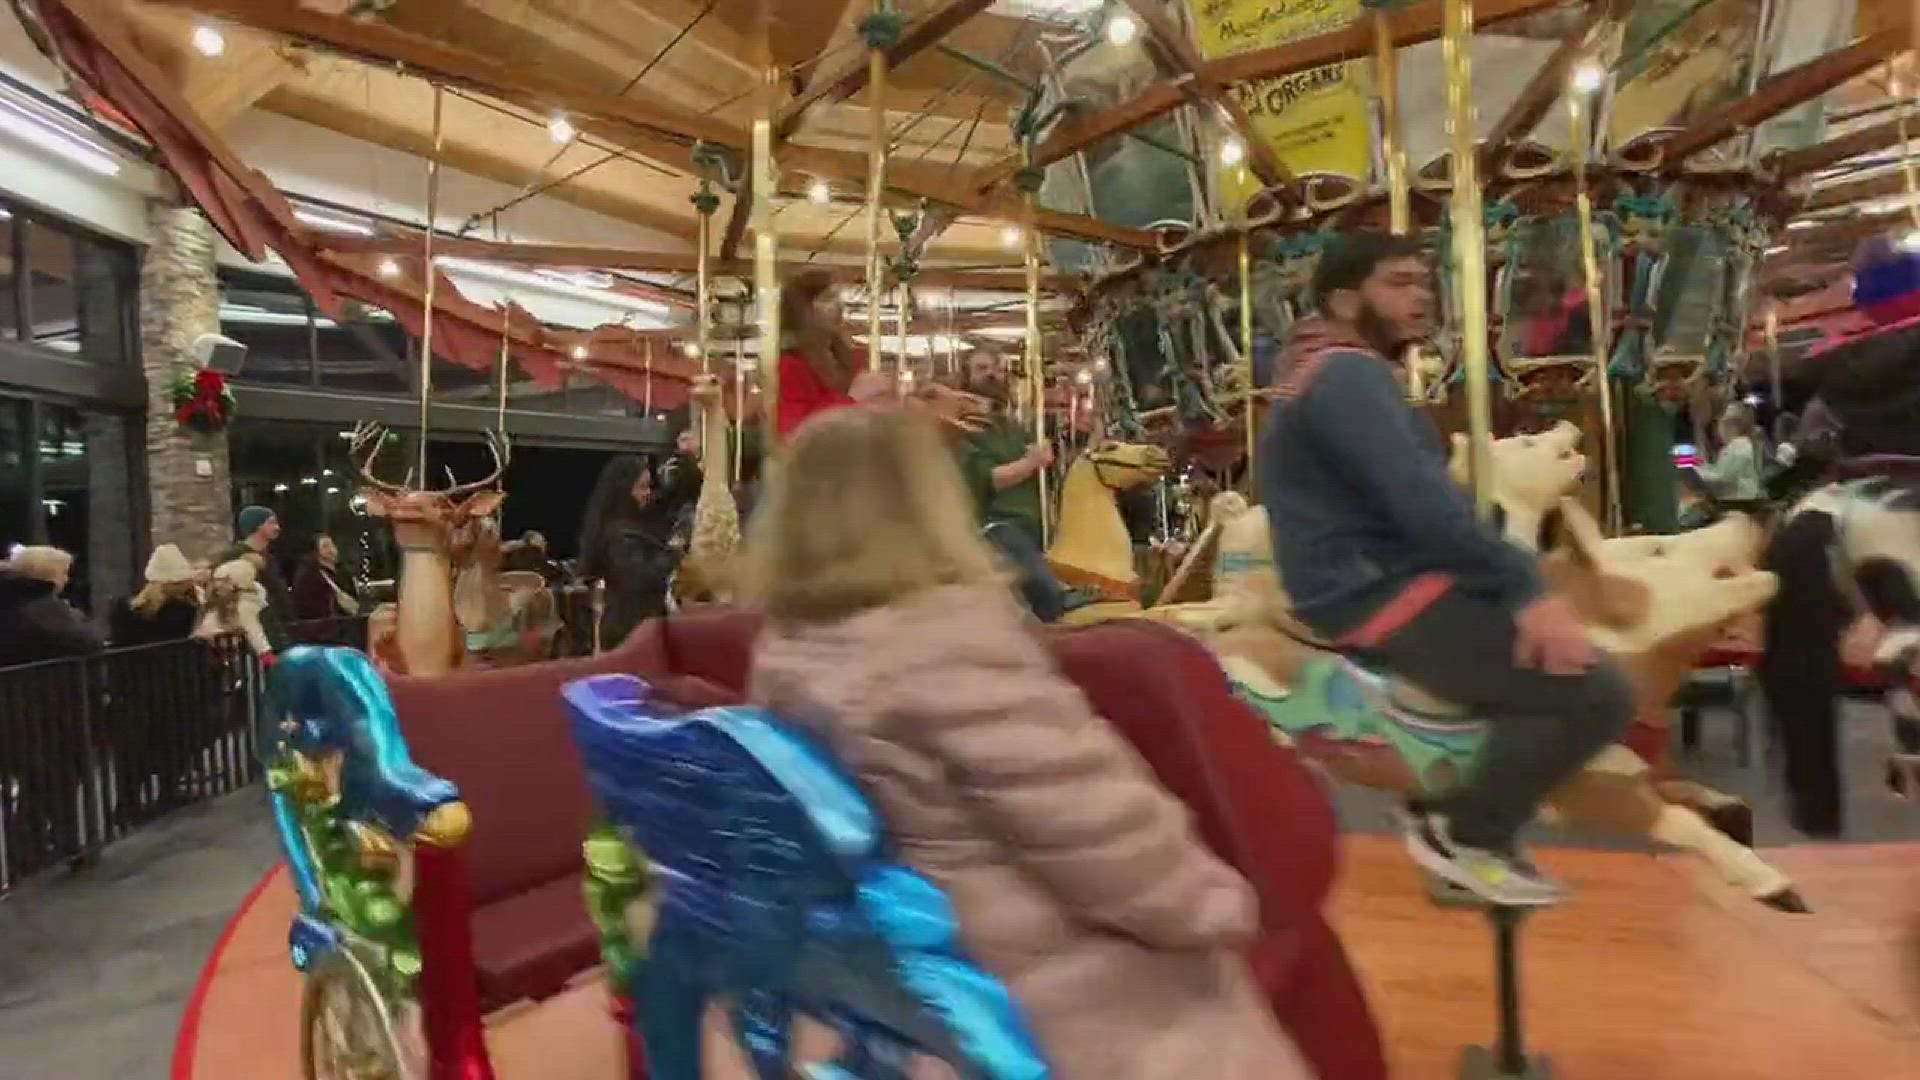 Burlington’s historic carousel is reopening after 3 years of renovations.